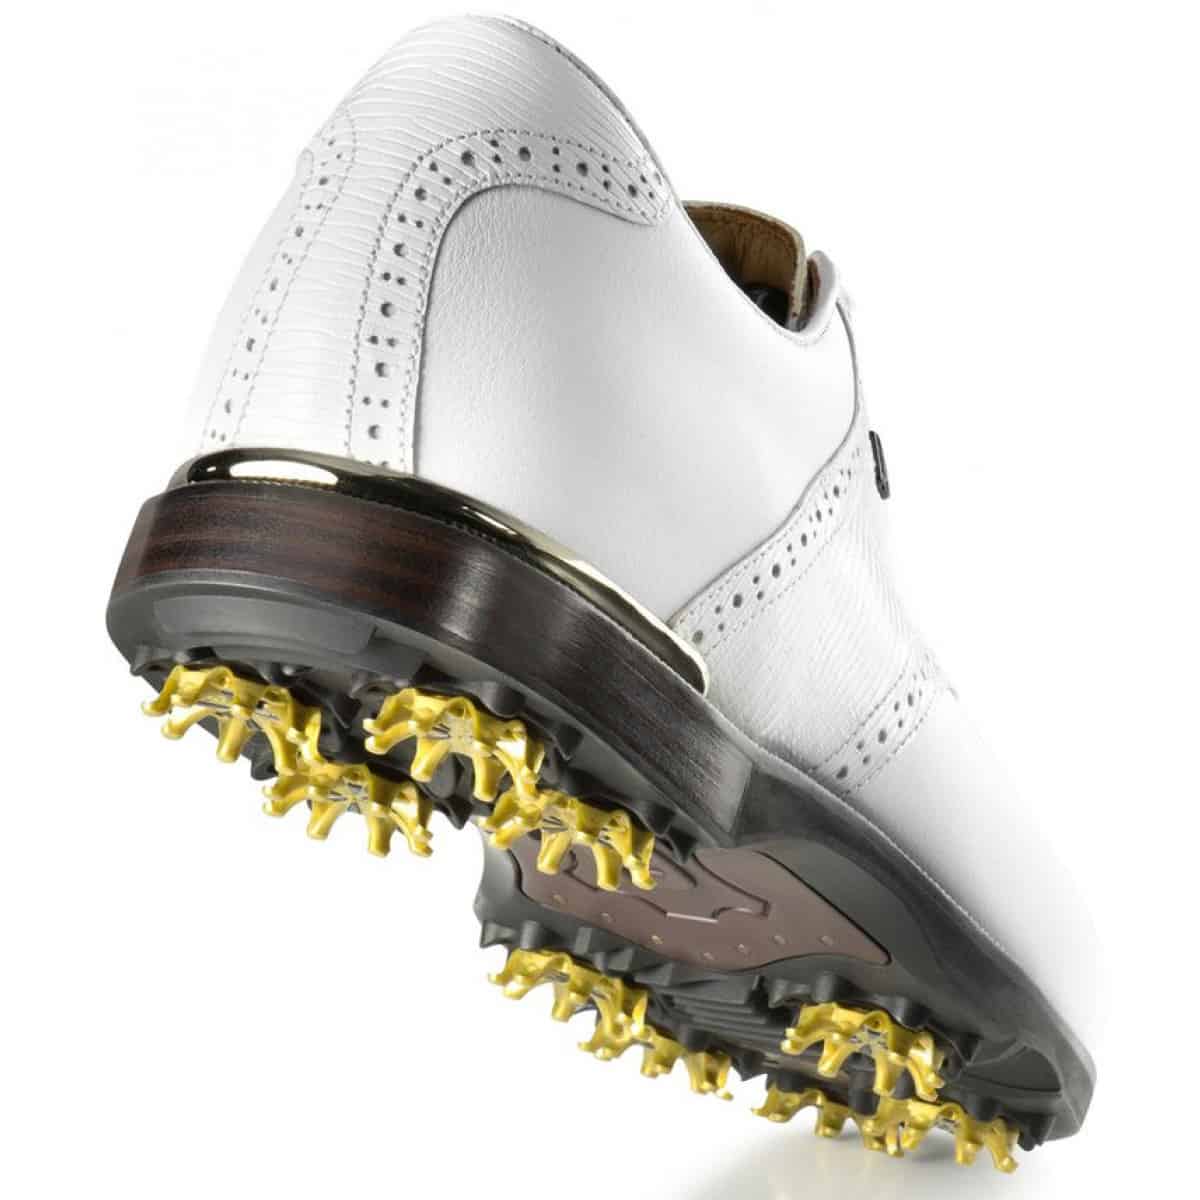 Golf footwear: Stepping into the future